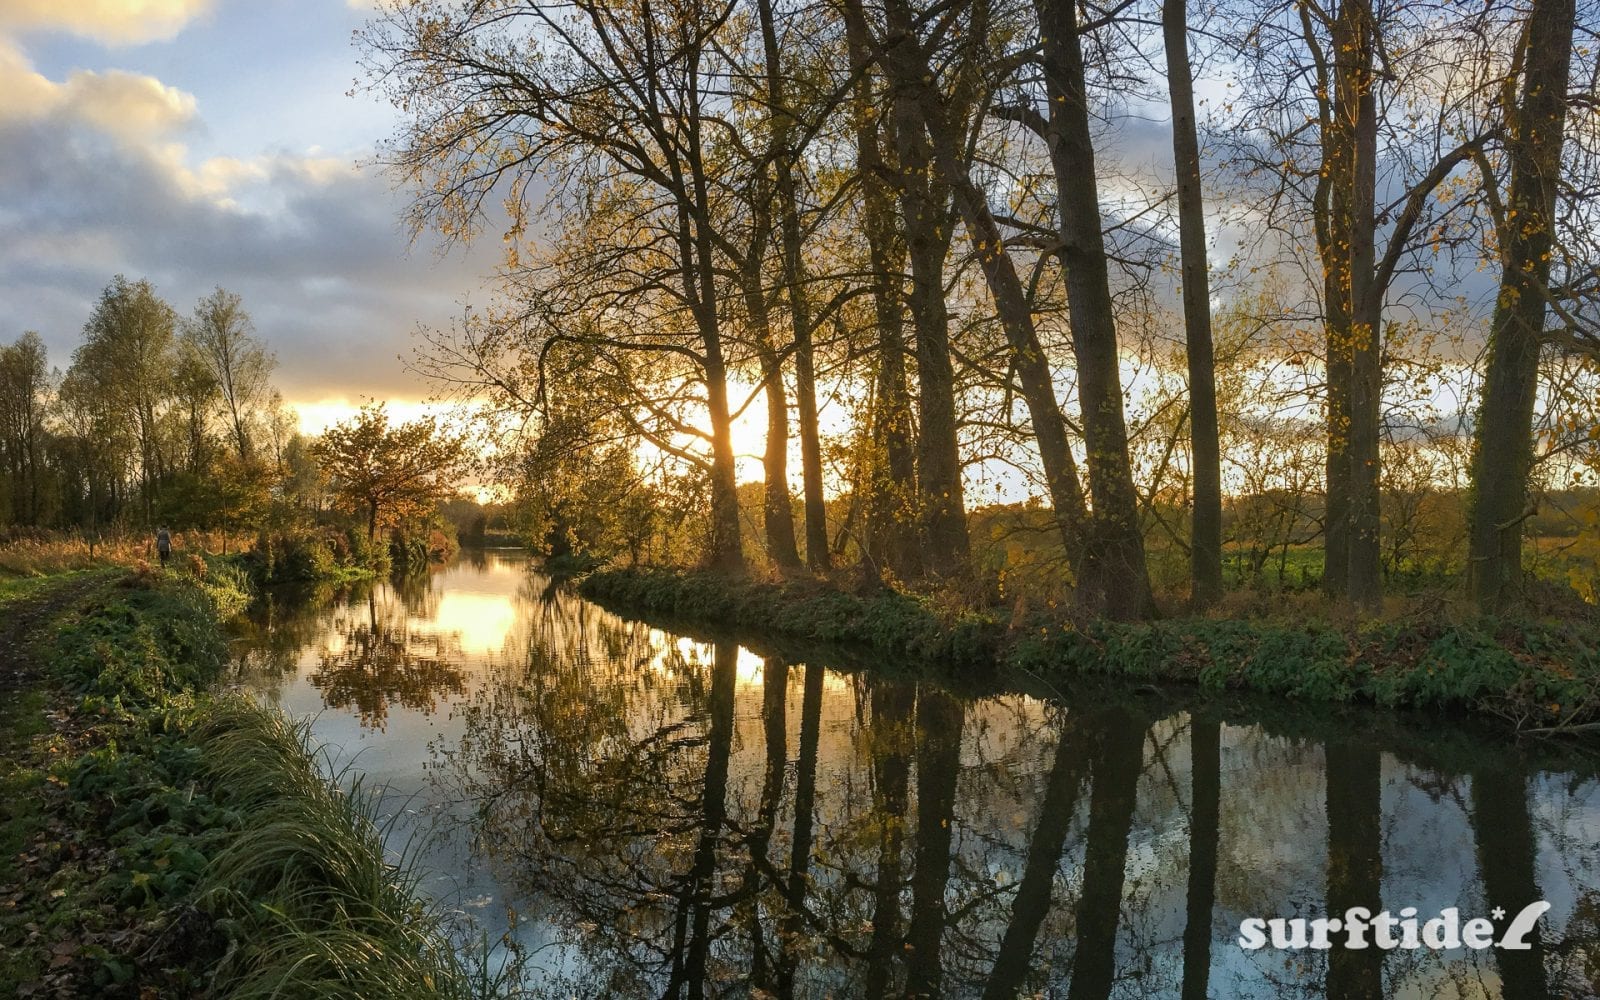 Sunlight and trees reflecting on the still water at sunset on the River Stort in Hertfordshire